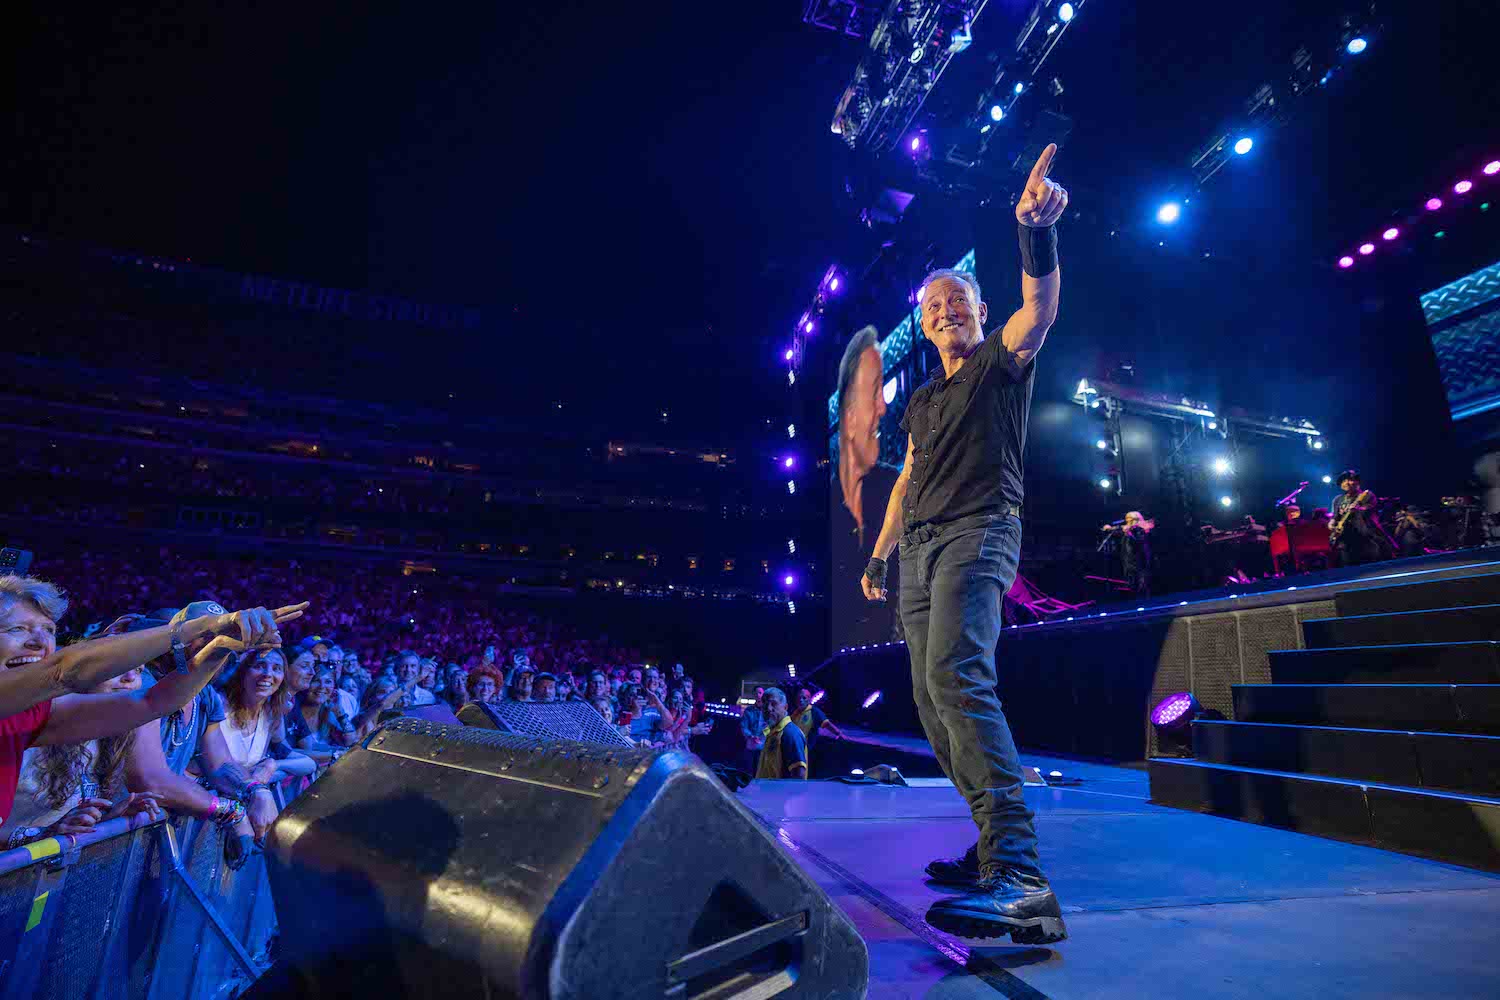 Bruce Springsteen & E Street Band at MetLife Stadium, East Rutherford, NJ on August 30, 2023.